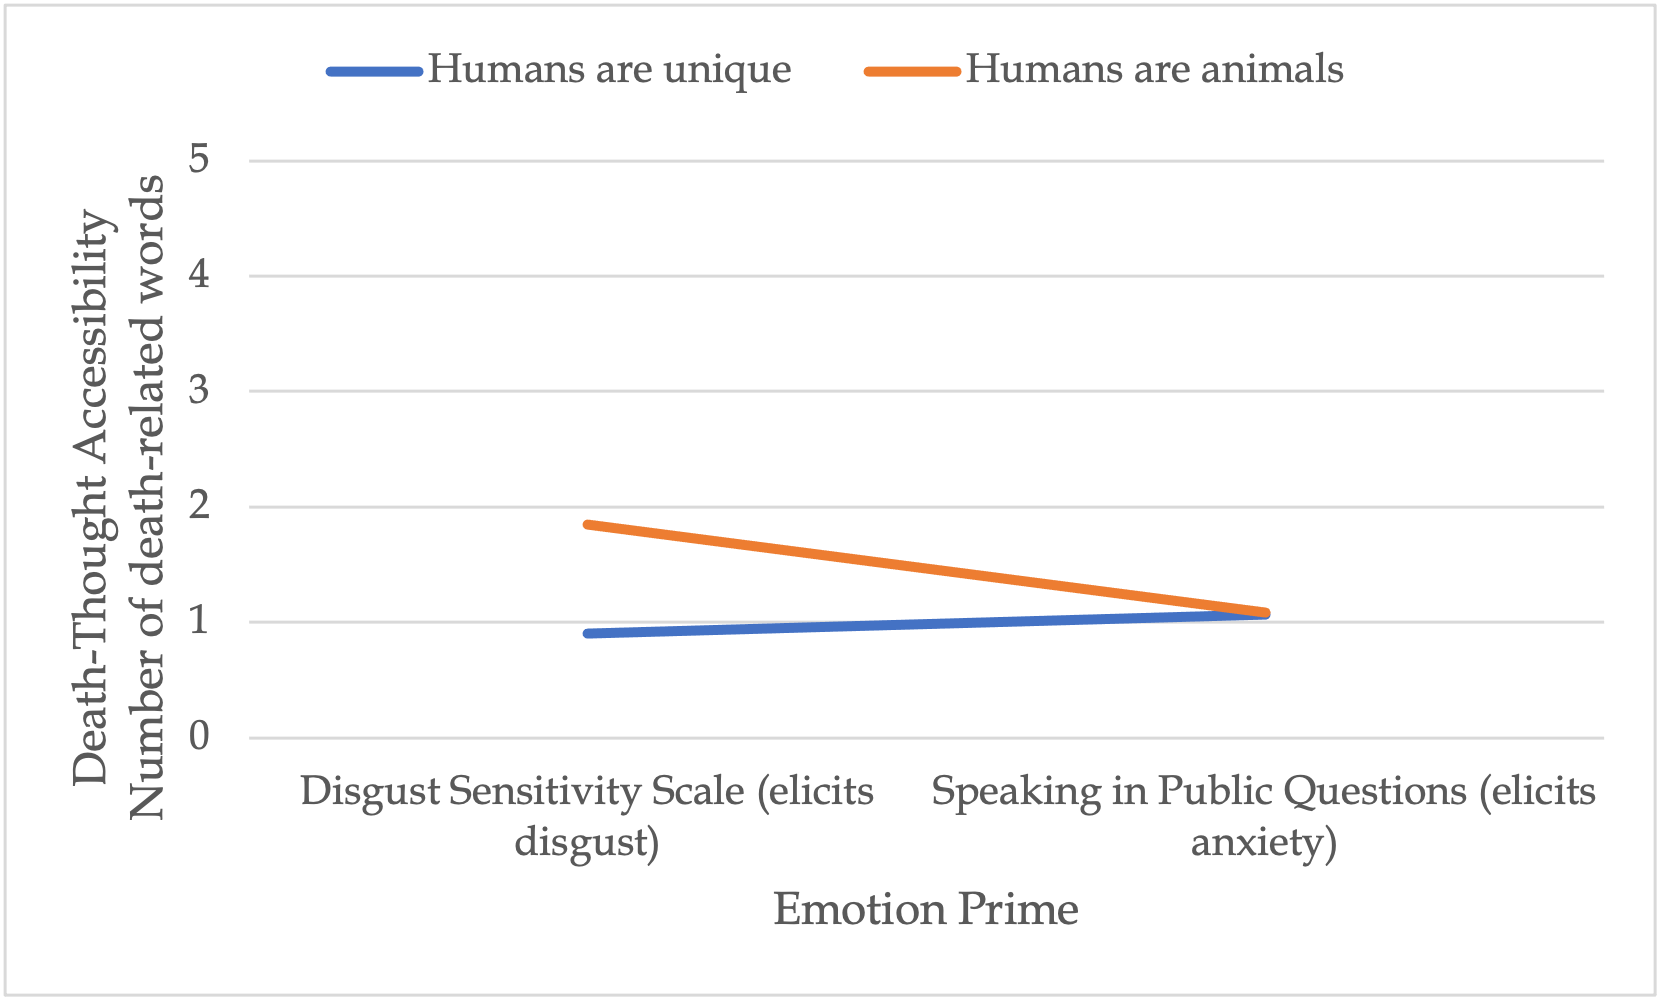 A line graph with two lines plotted. The blue line represents, Humans are unique. The orange line represents, humans are animals. The y axis measures death thought accessibility via the number of death related words, this starts at 0, increases in increments of, to a maximum of 5. The x axis elapses over two labels for emotion prime. Disgust sensitivity scale (elicits disgust) (start), traversing to the second label - Speaking in public questions (elicits anxiety).